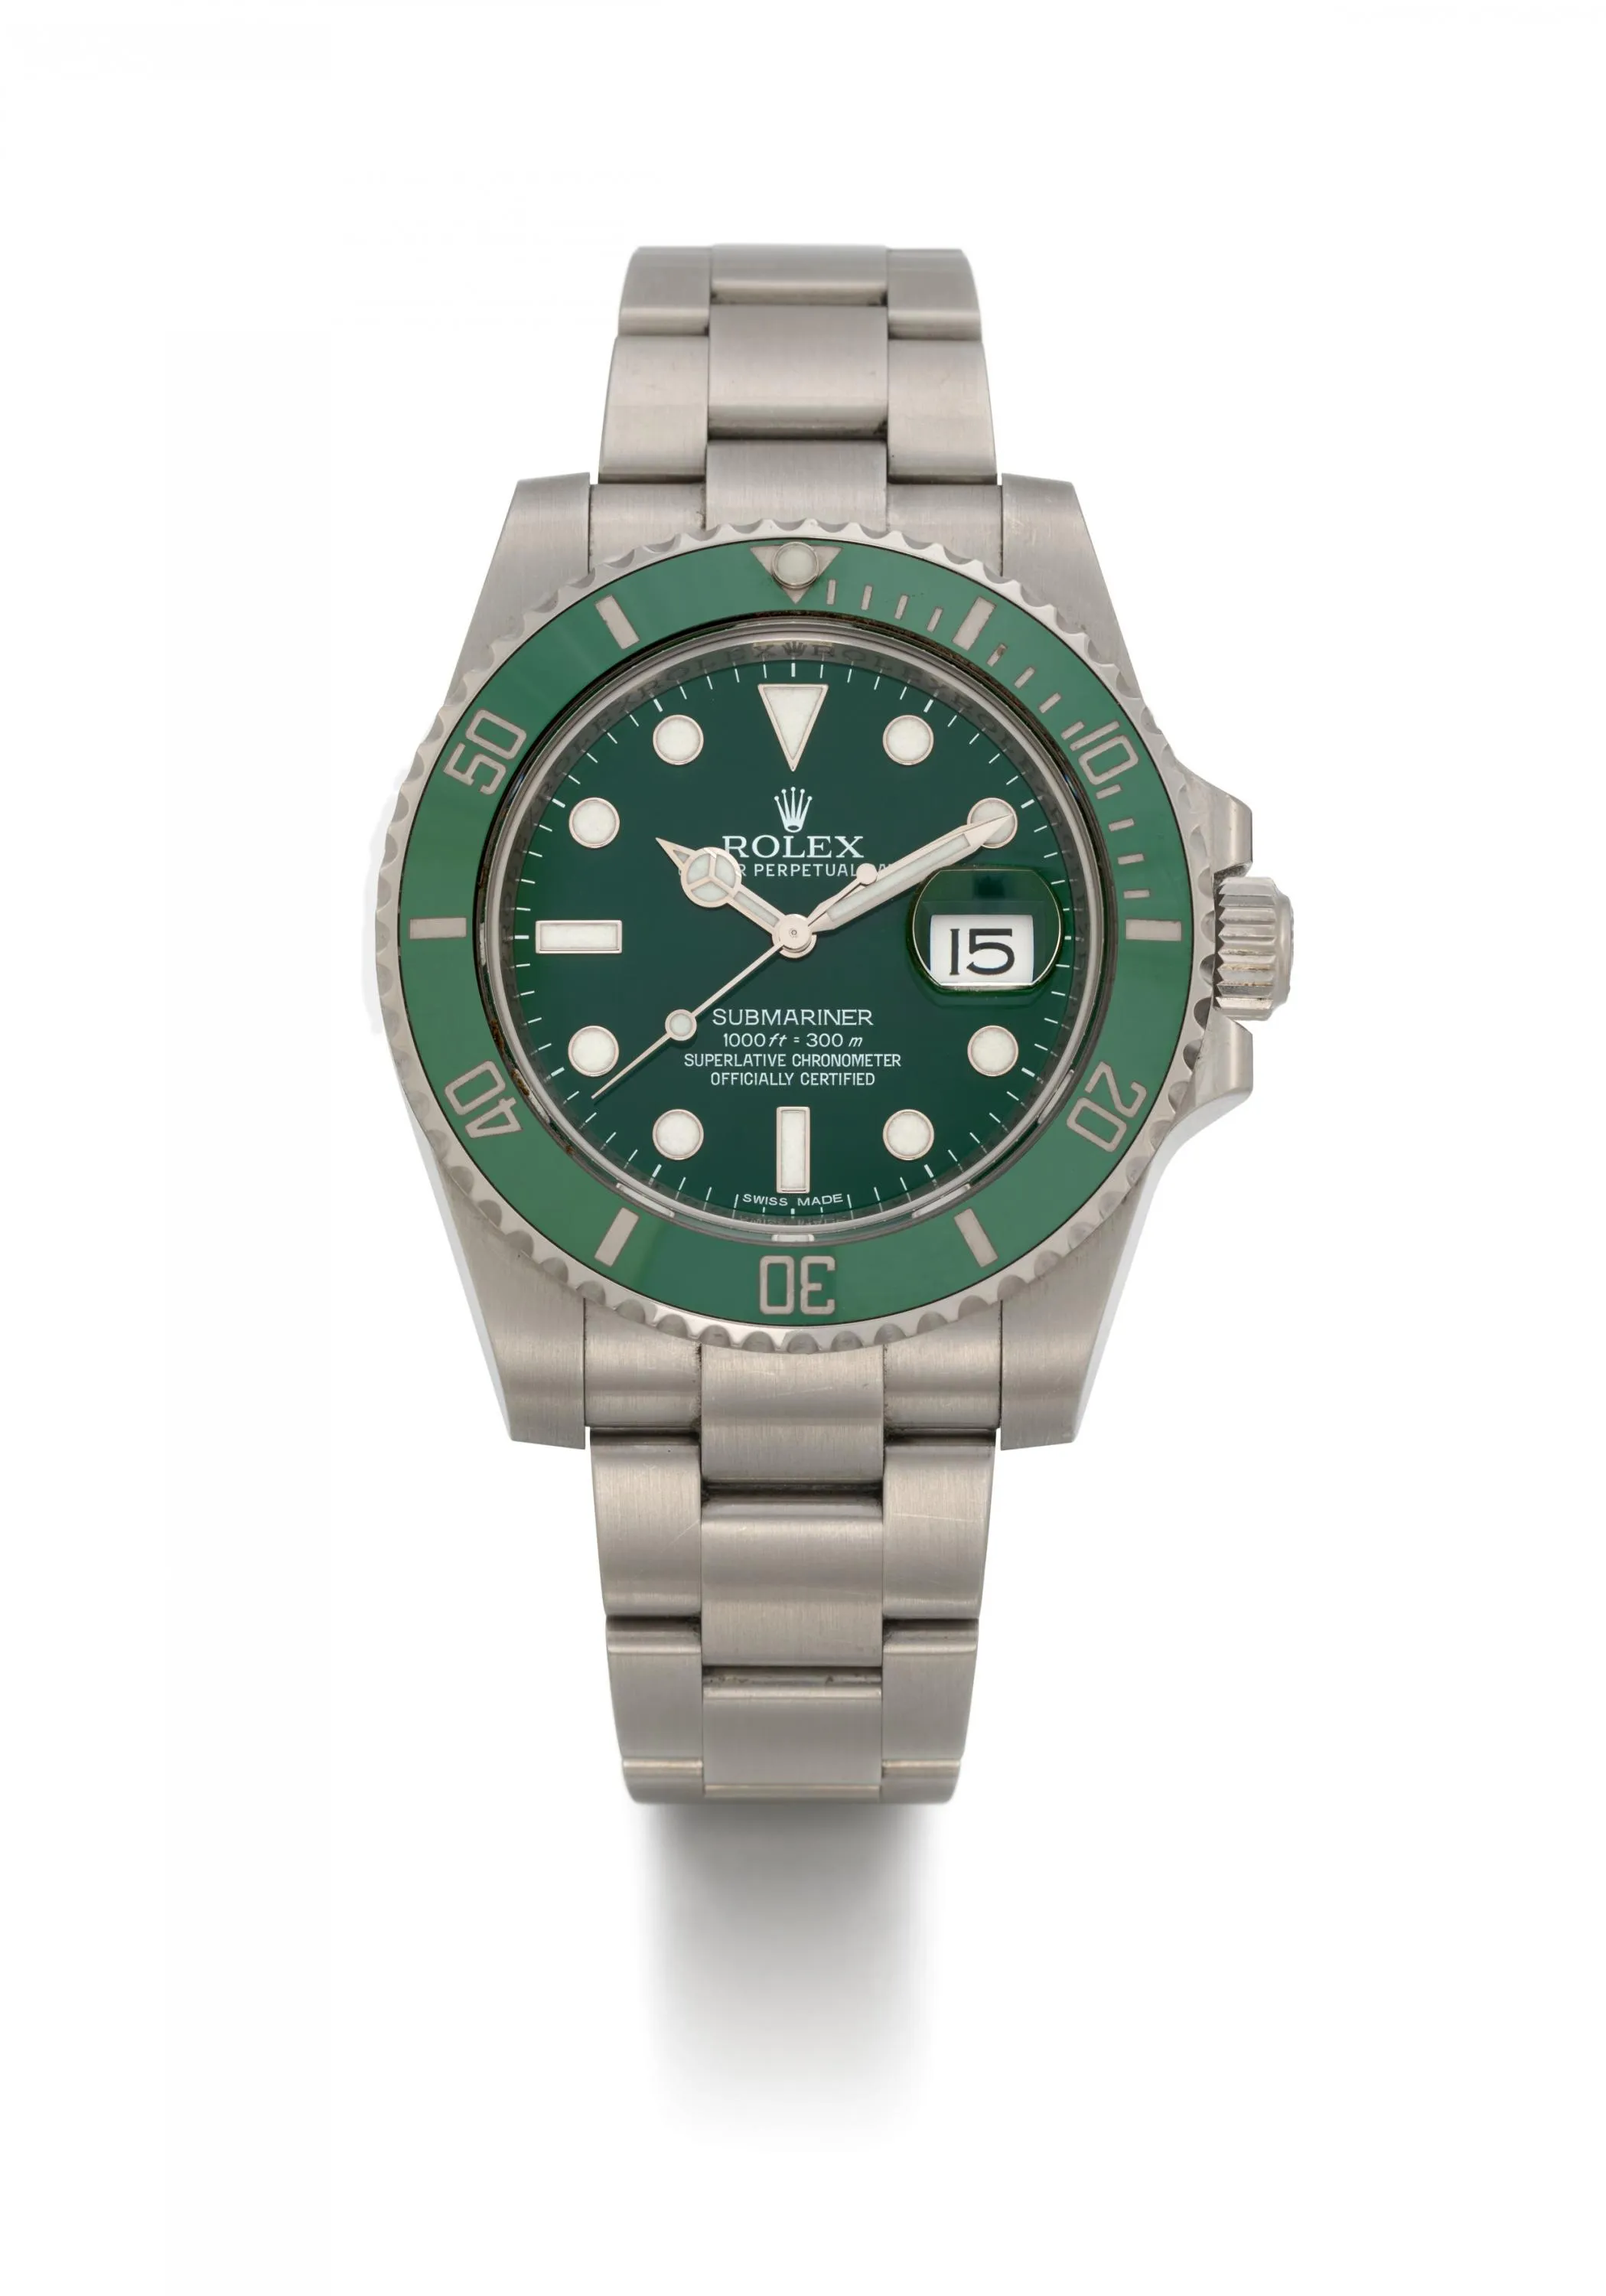 Rolex Submariner 116610LV 40mm Stainless steel and Cerachrom Green